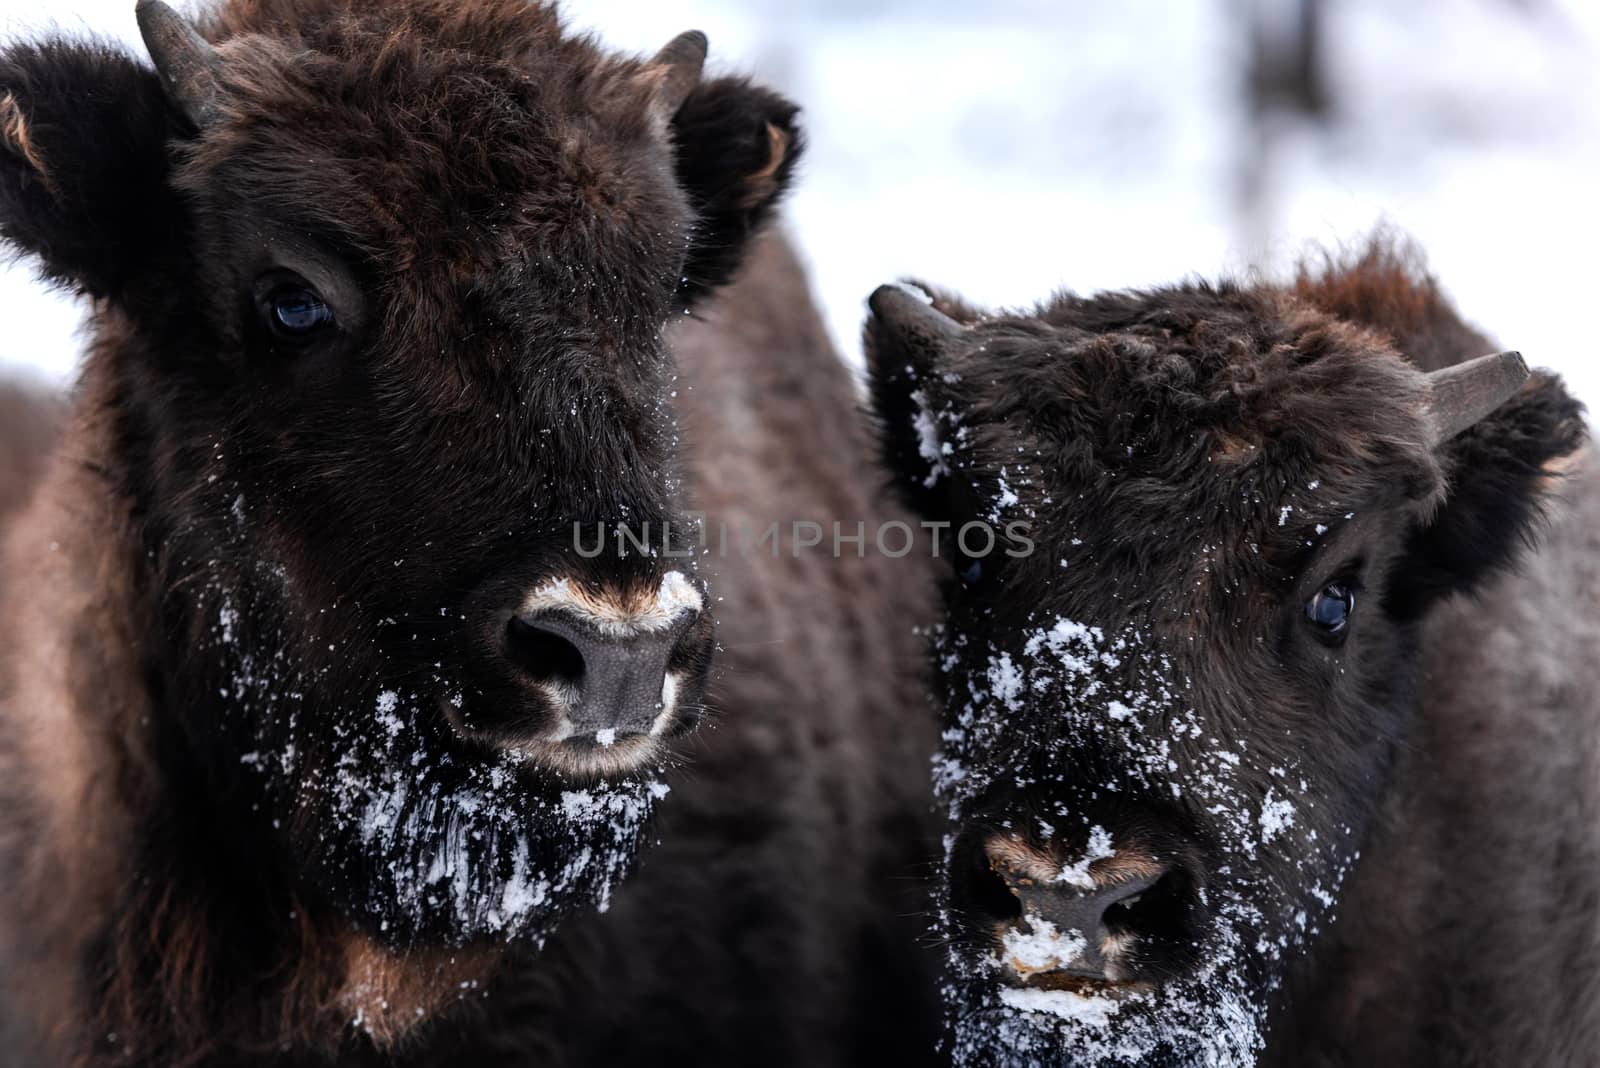 Young and Adult European bison (Bison bonasus) Family Portrait Outdoor at Winter Season.